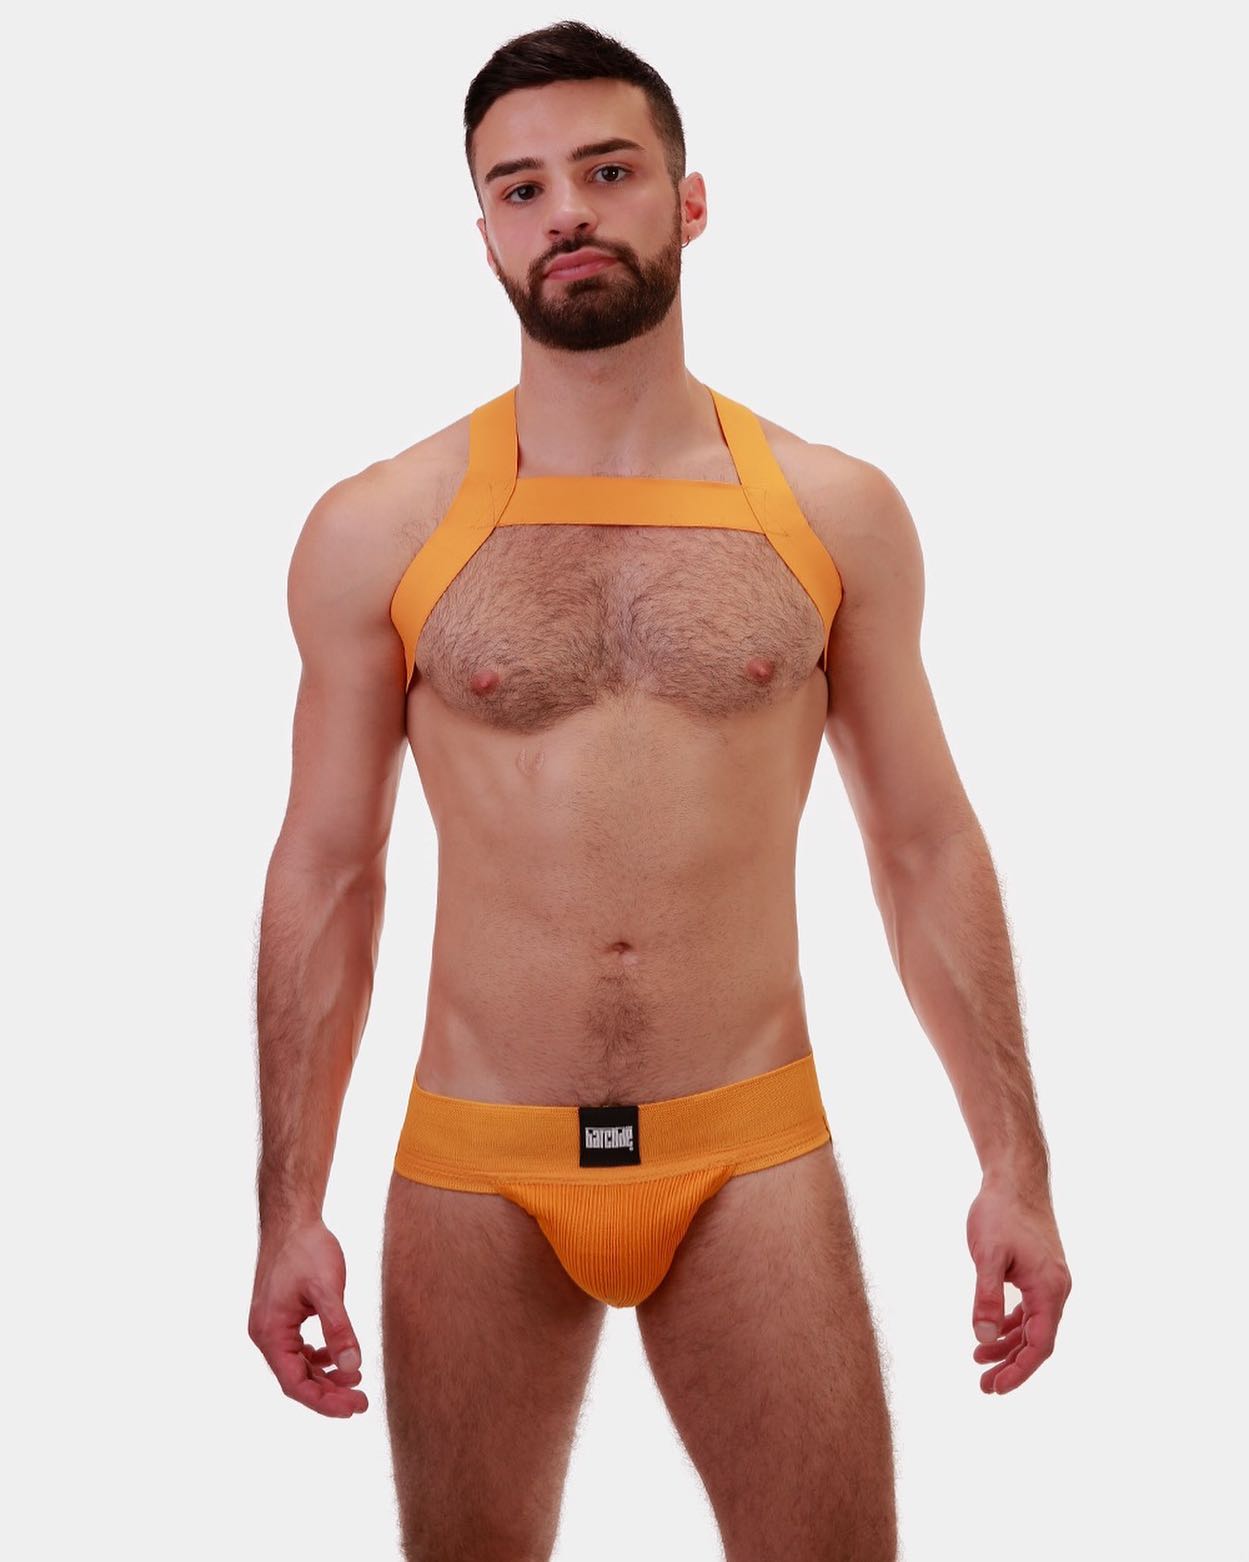 Get ready to elevate your jockstrap game with the iconic Sergey Jock from Barcode. This contemporary take on the classic BIKE No 10 design is perfect for both jockstrap newbies and seasoned vets. Try it out in the latest hues and experience the ultimate in comfort and style.
_____
menandunderwear.com/shop